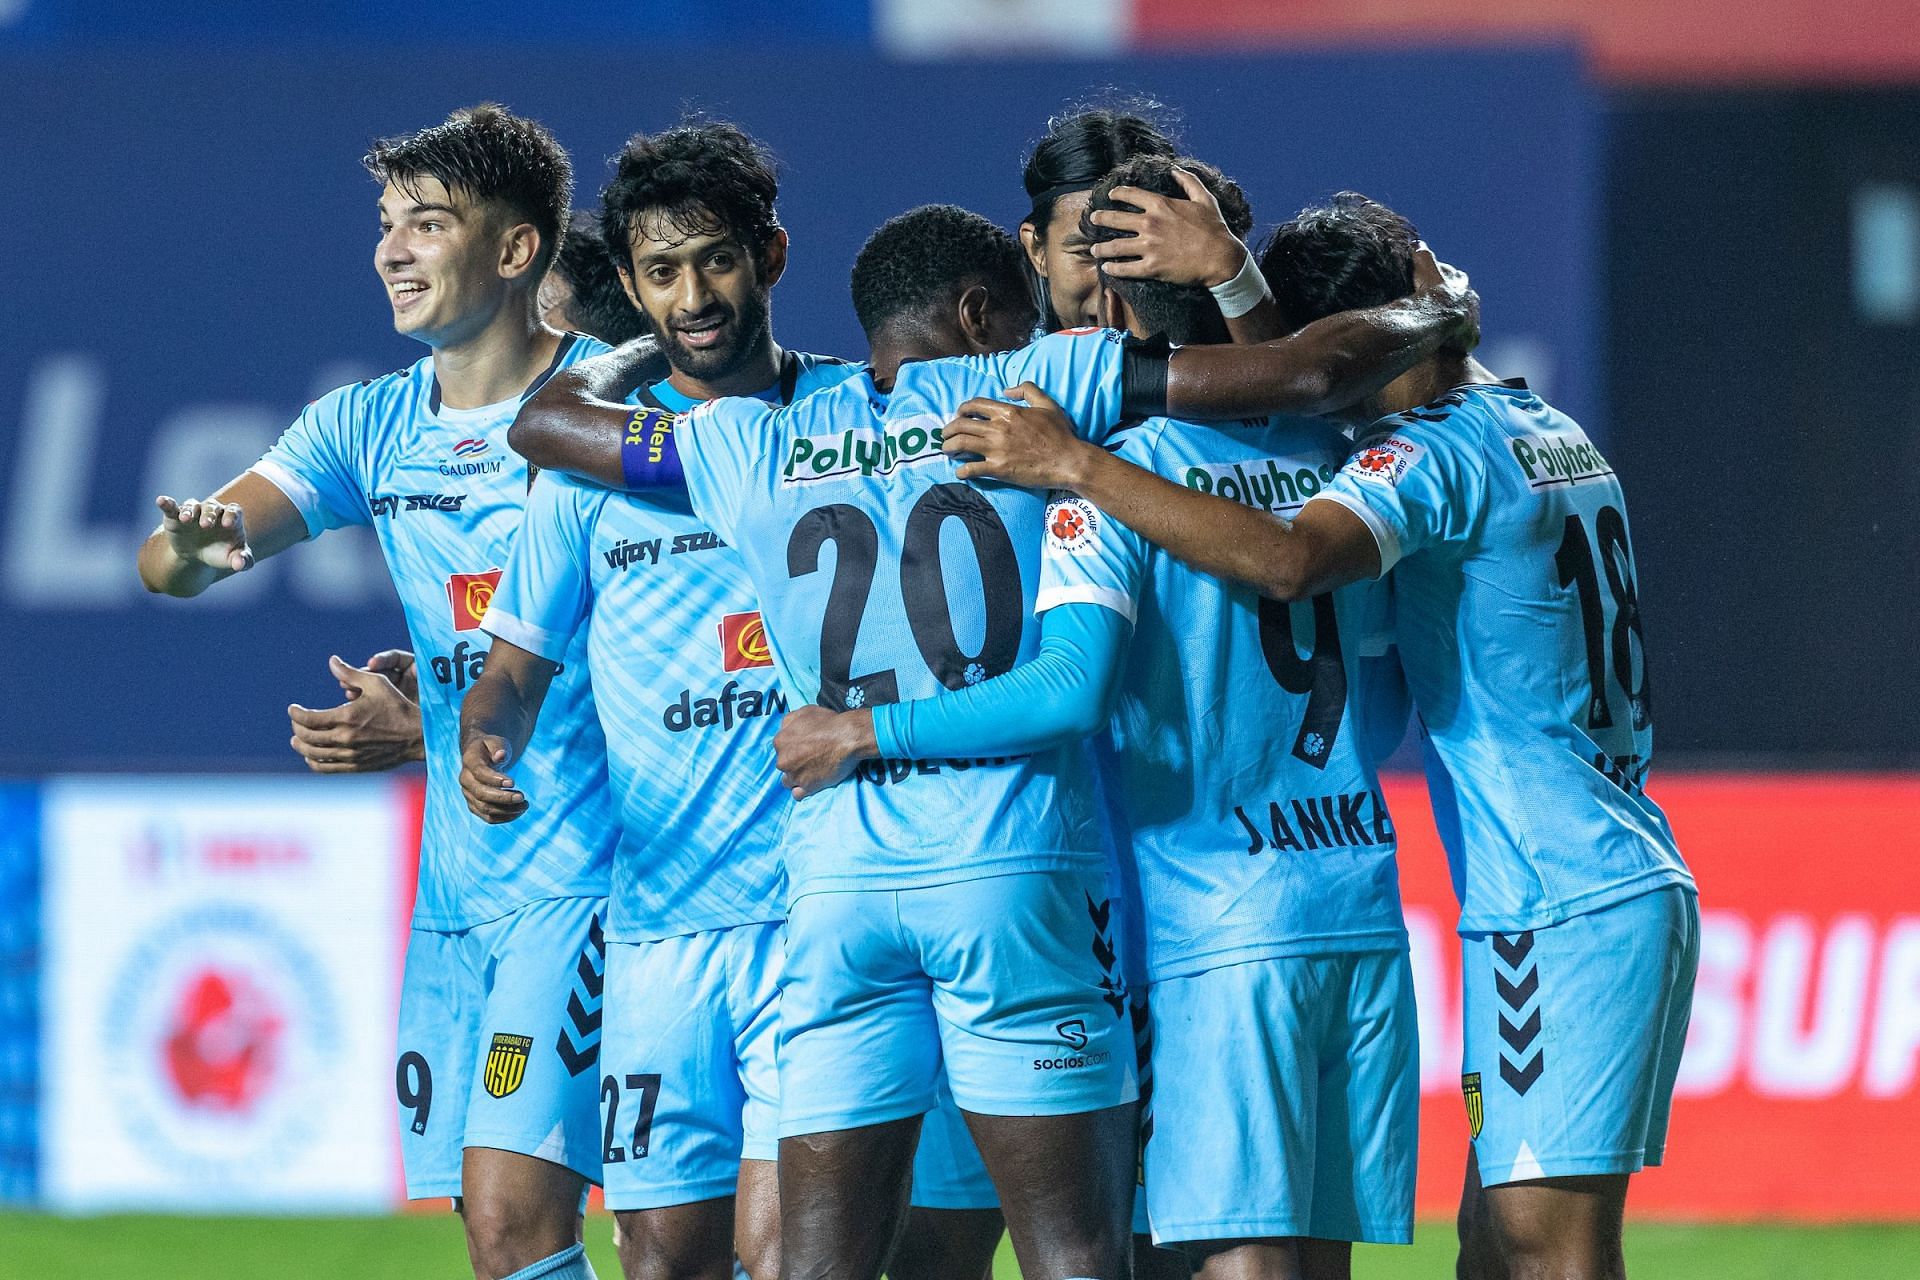 Hyderabad FC players celebrate after scoring a goal against SC East Bengal. (Image Courtesy: ISL Media)